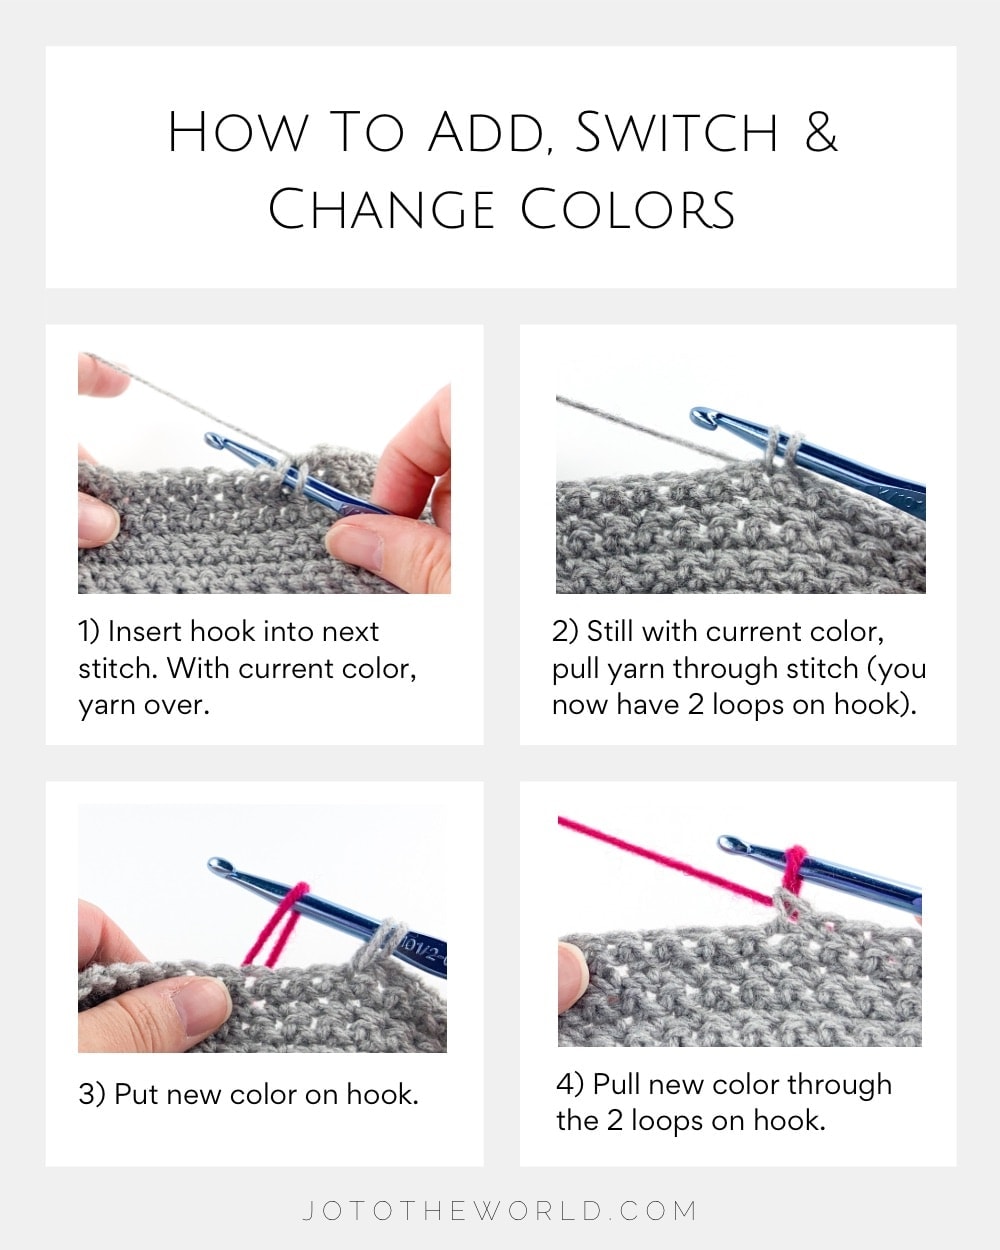 How to Add, Switch & Change Colors in Crochet